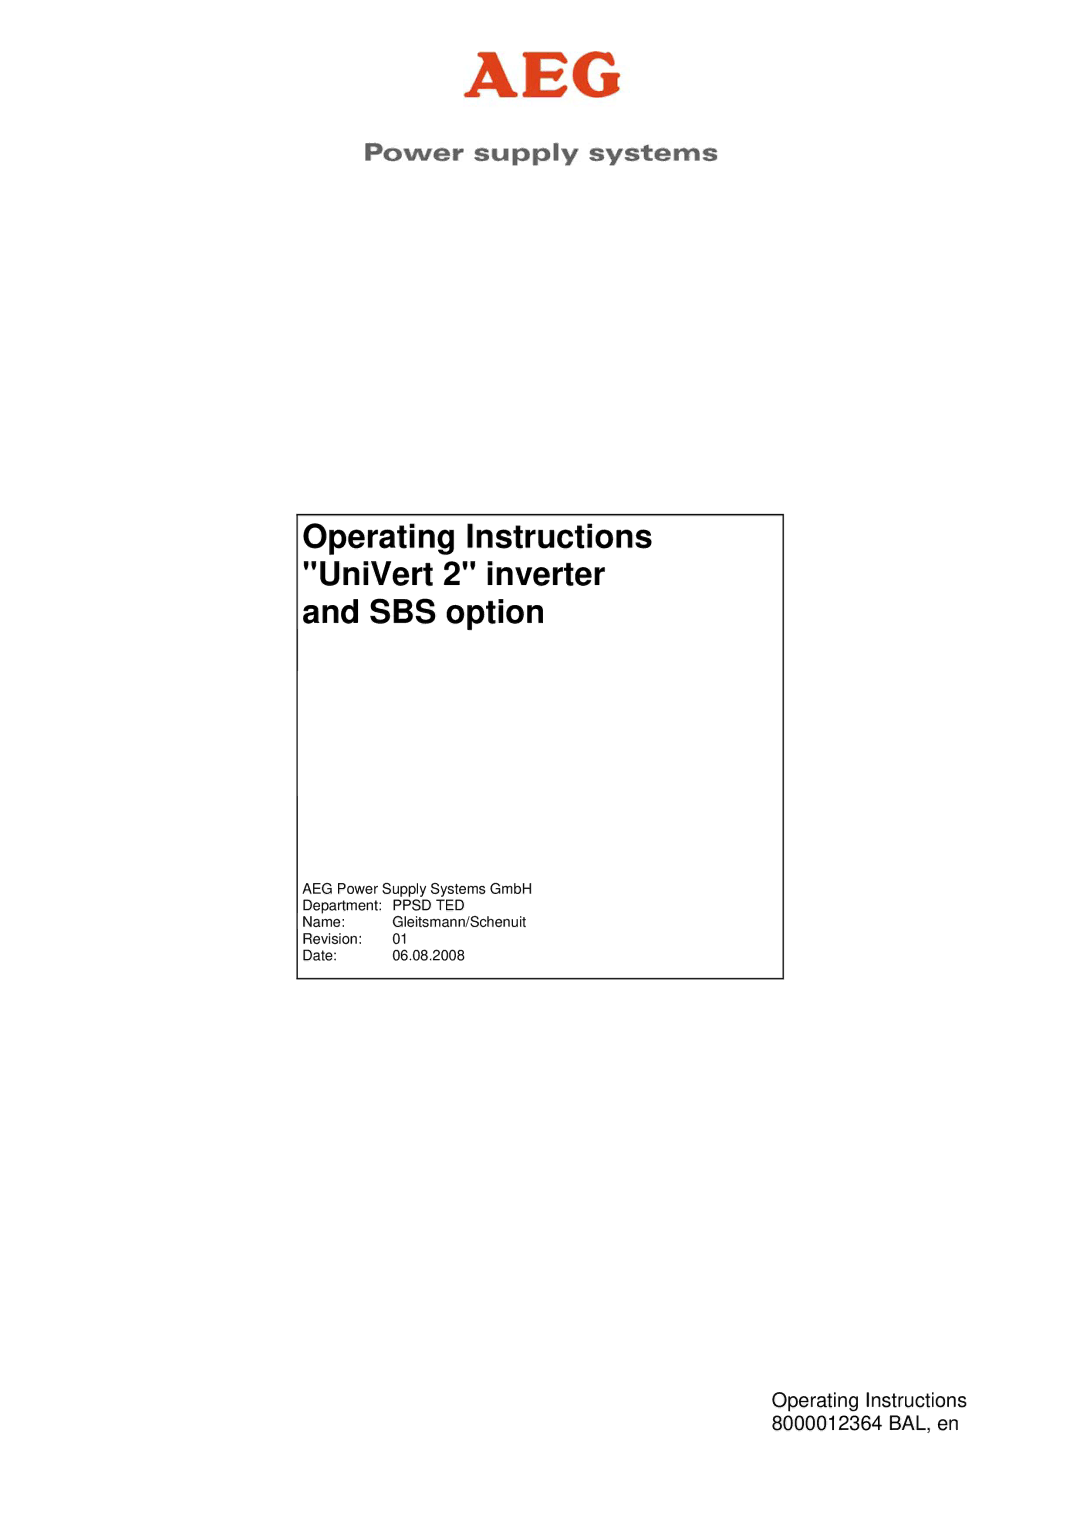 AEG 8000012364 BAL operating instructions Operating Instructions UniVert 2 inverter and SBS option 